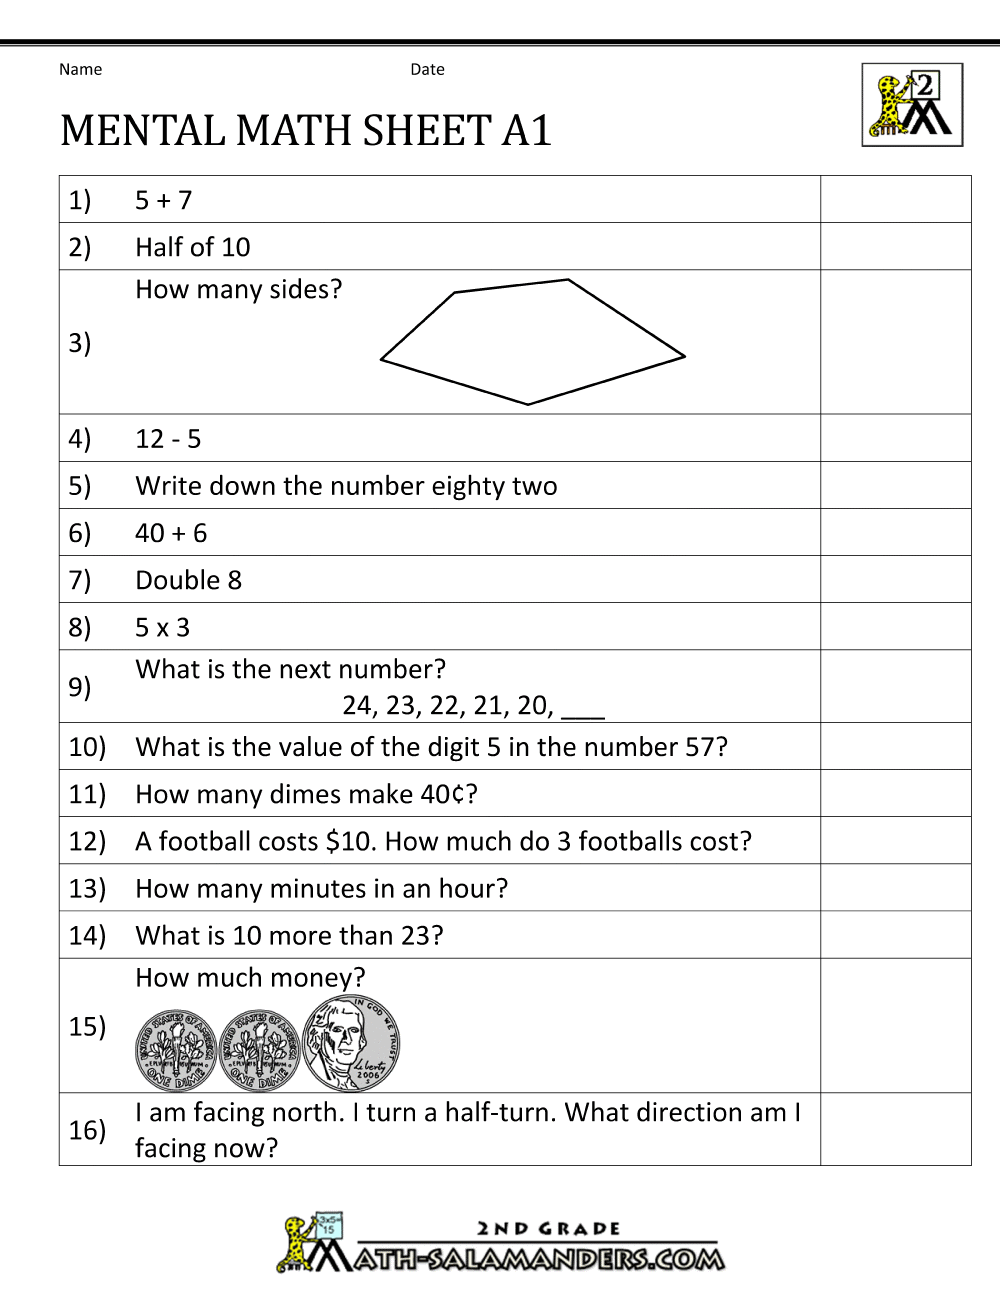 Mental Maths Worksheet For Class 2 Pdf With Answers